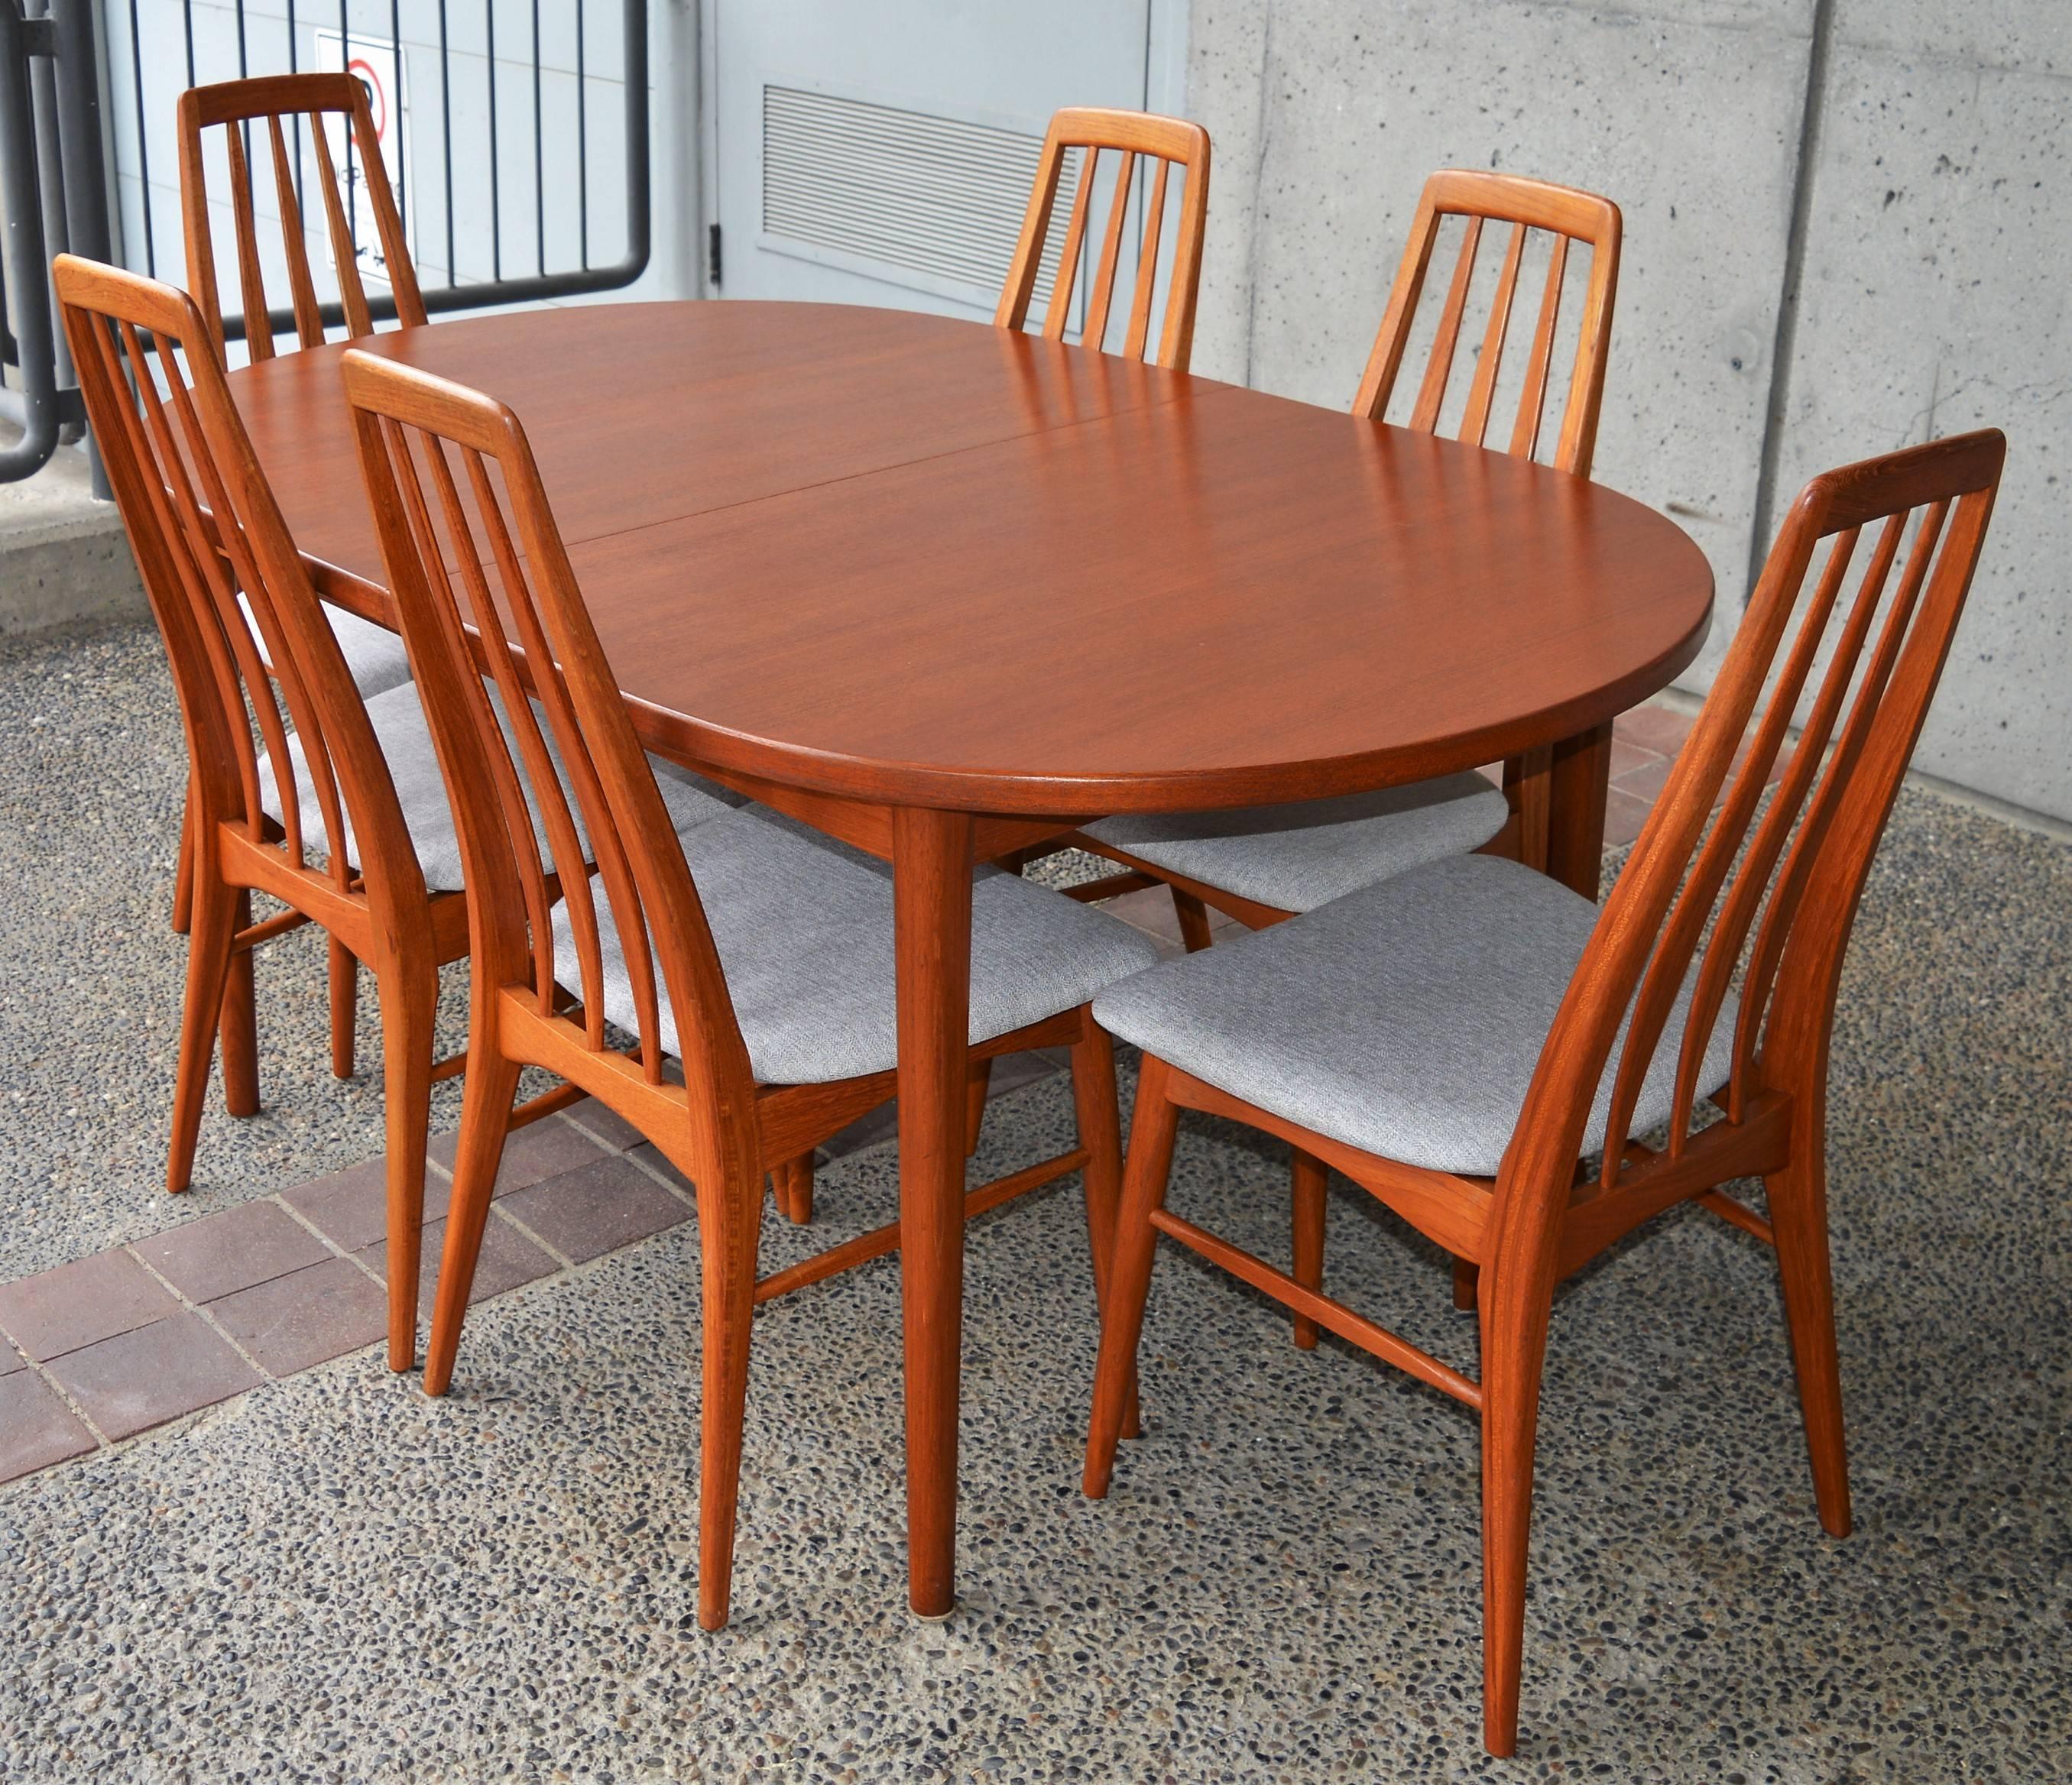 This gorgeous, quality, all wood Danish modern oval teak dining table was designed by Nils Jonsson for Troeds Bjärum (Sweden) and is the Ove model, 1960s. Without leaves, it seats six people and has two large extension leaves that store under the